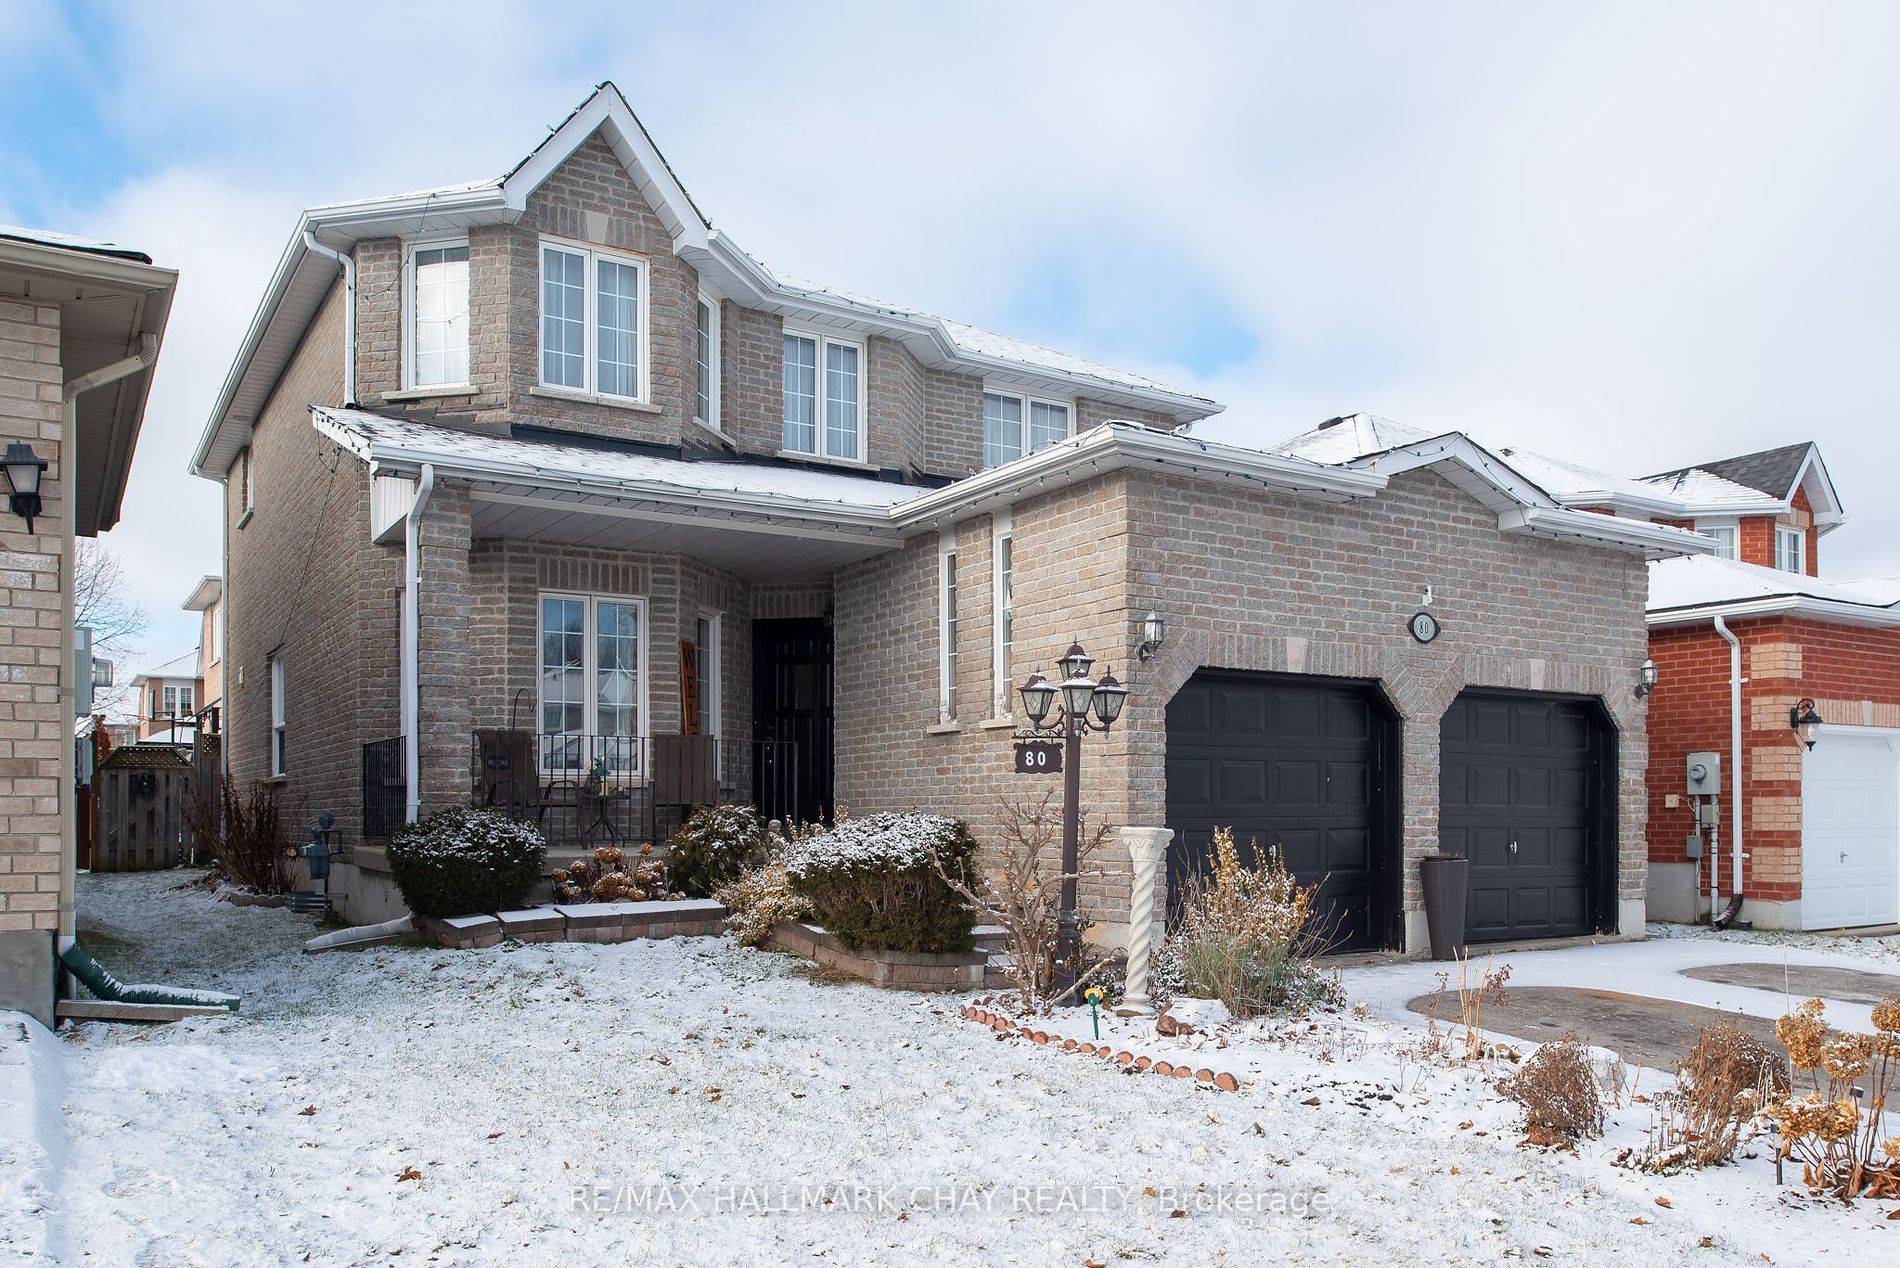 Don't Miss Your Chance To Make This Impeccably Maintained 2 Storey Home Yours, Nestled In One Of Barrie's Welcoming Family Friendly Neighborhoods.